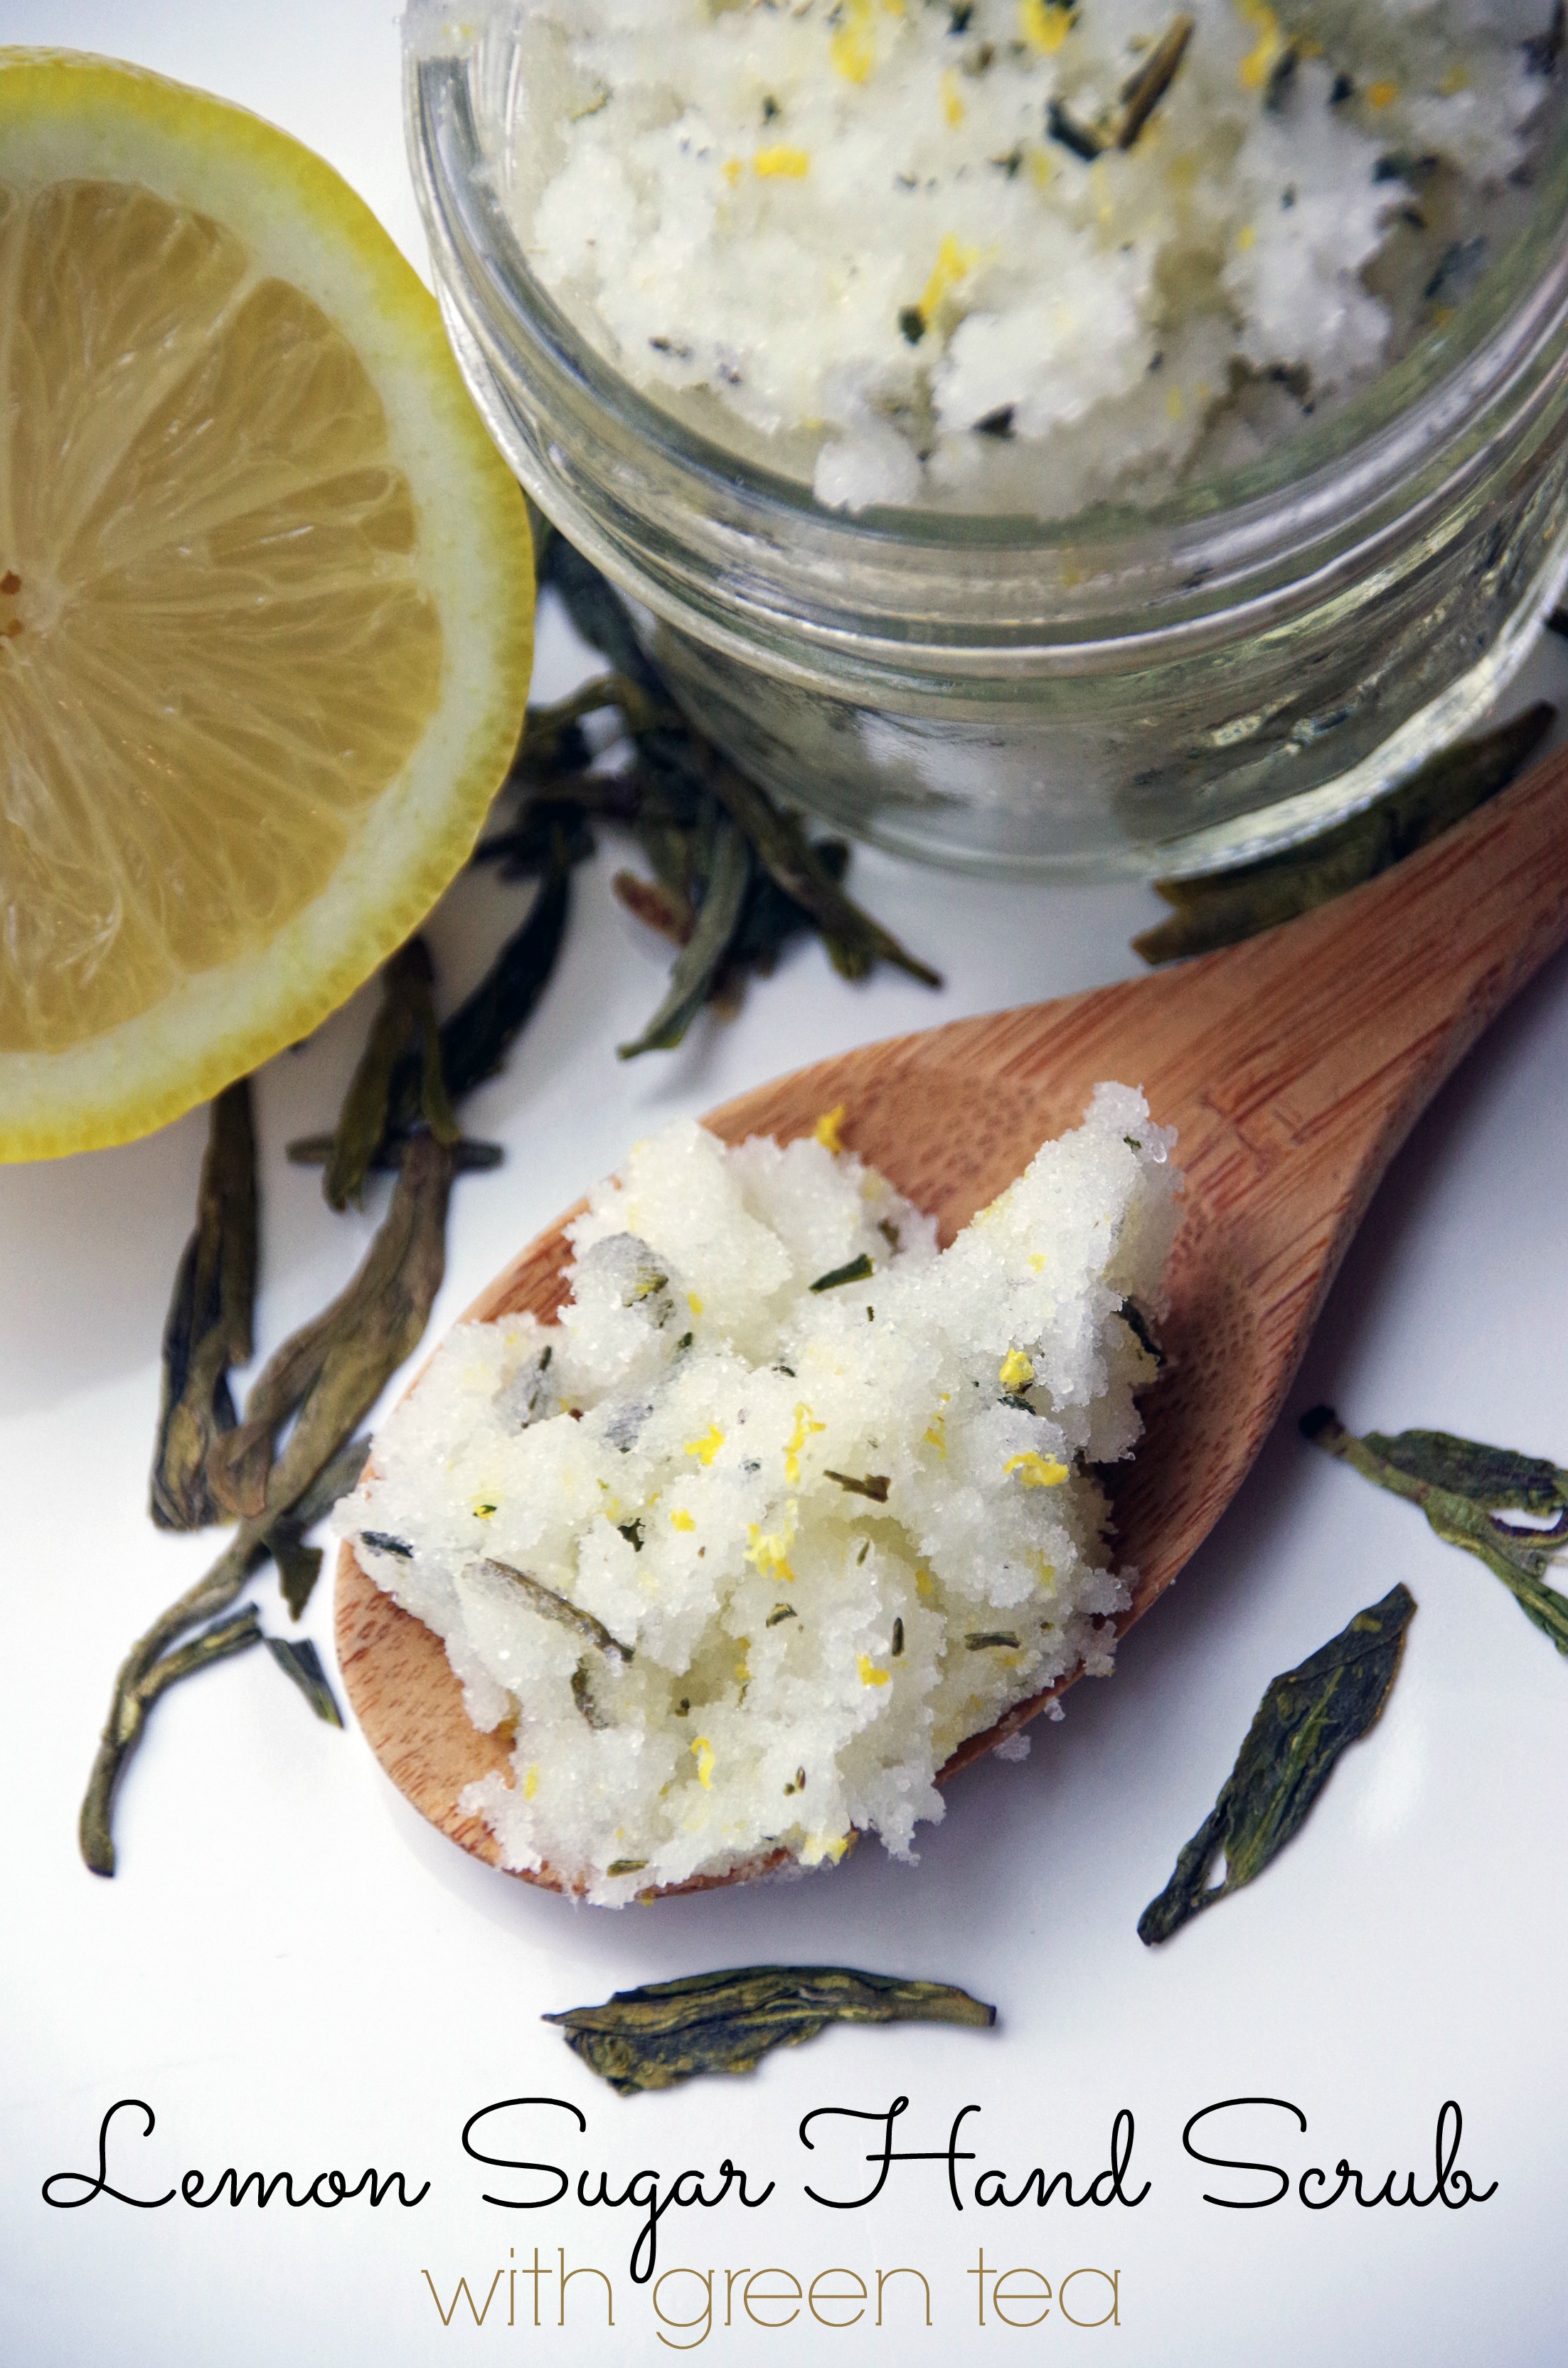 Homemade Lemon Sugar Hand Scrub with Green Tea. Great gift for gardeners, Mother's Day or for anyone who loves soft skin and the small of lemons!